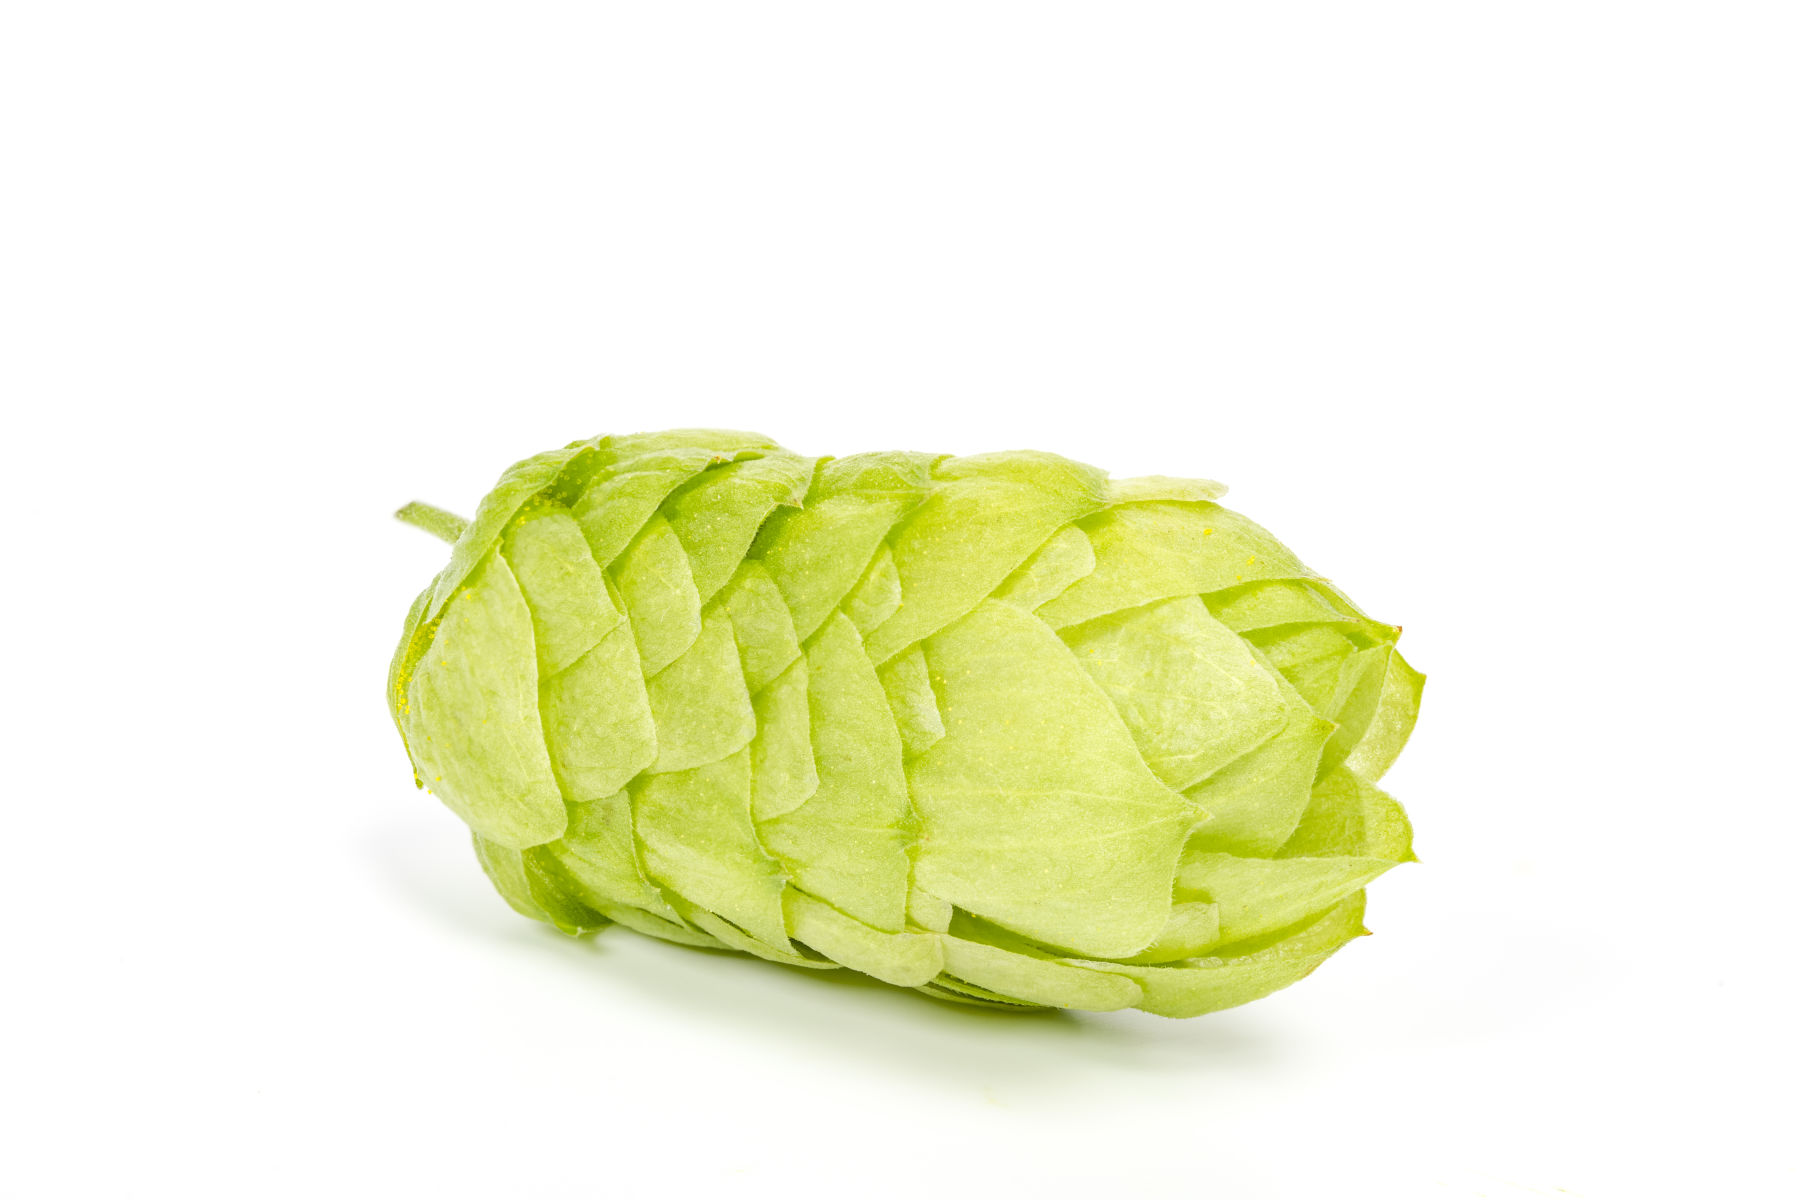 NZ hops can help during fasting